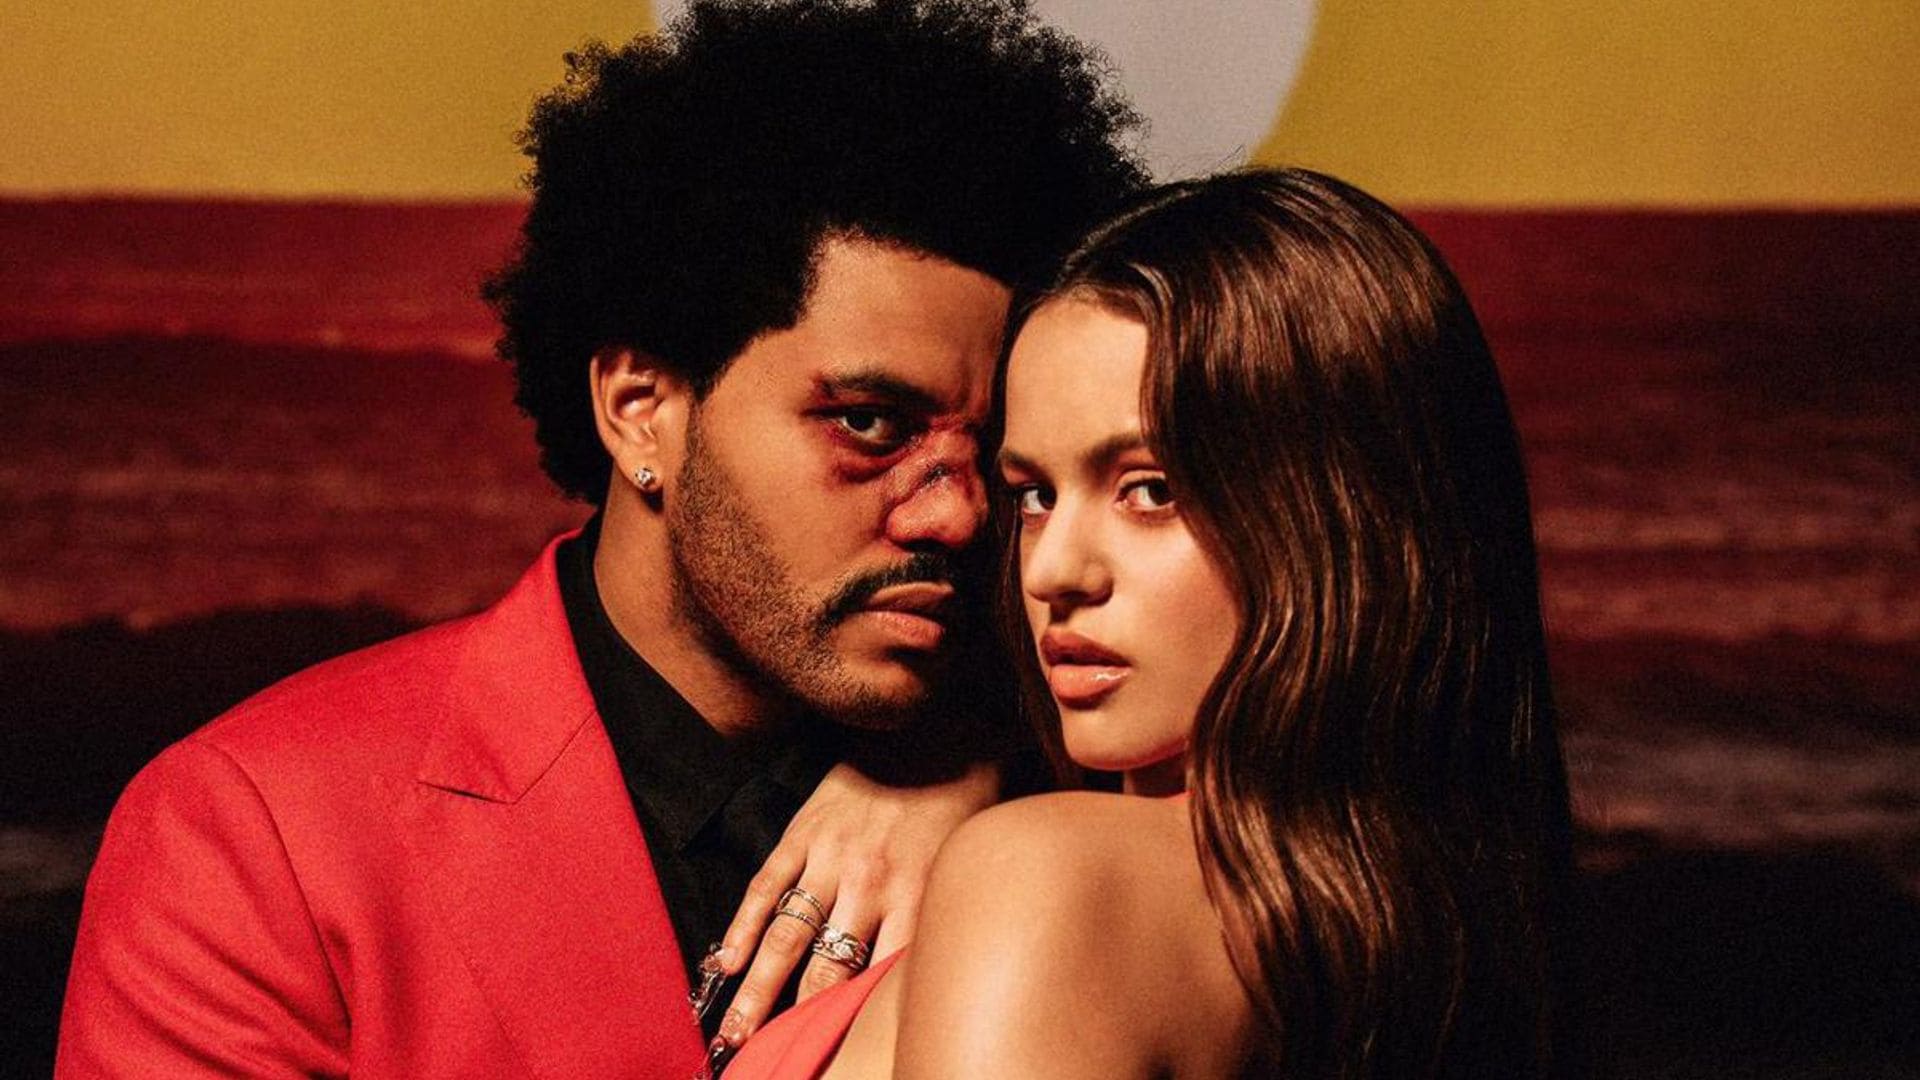 The Weeknd taps Rosalía for bilingual “Blinding Lights” remix